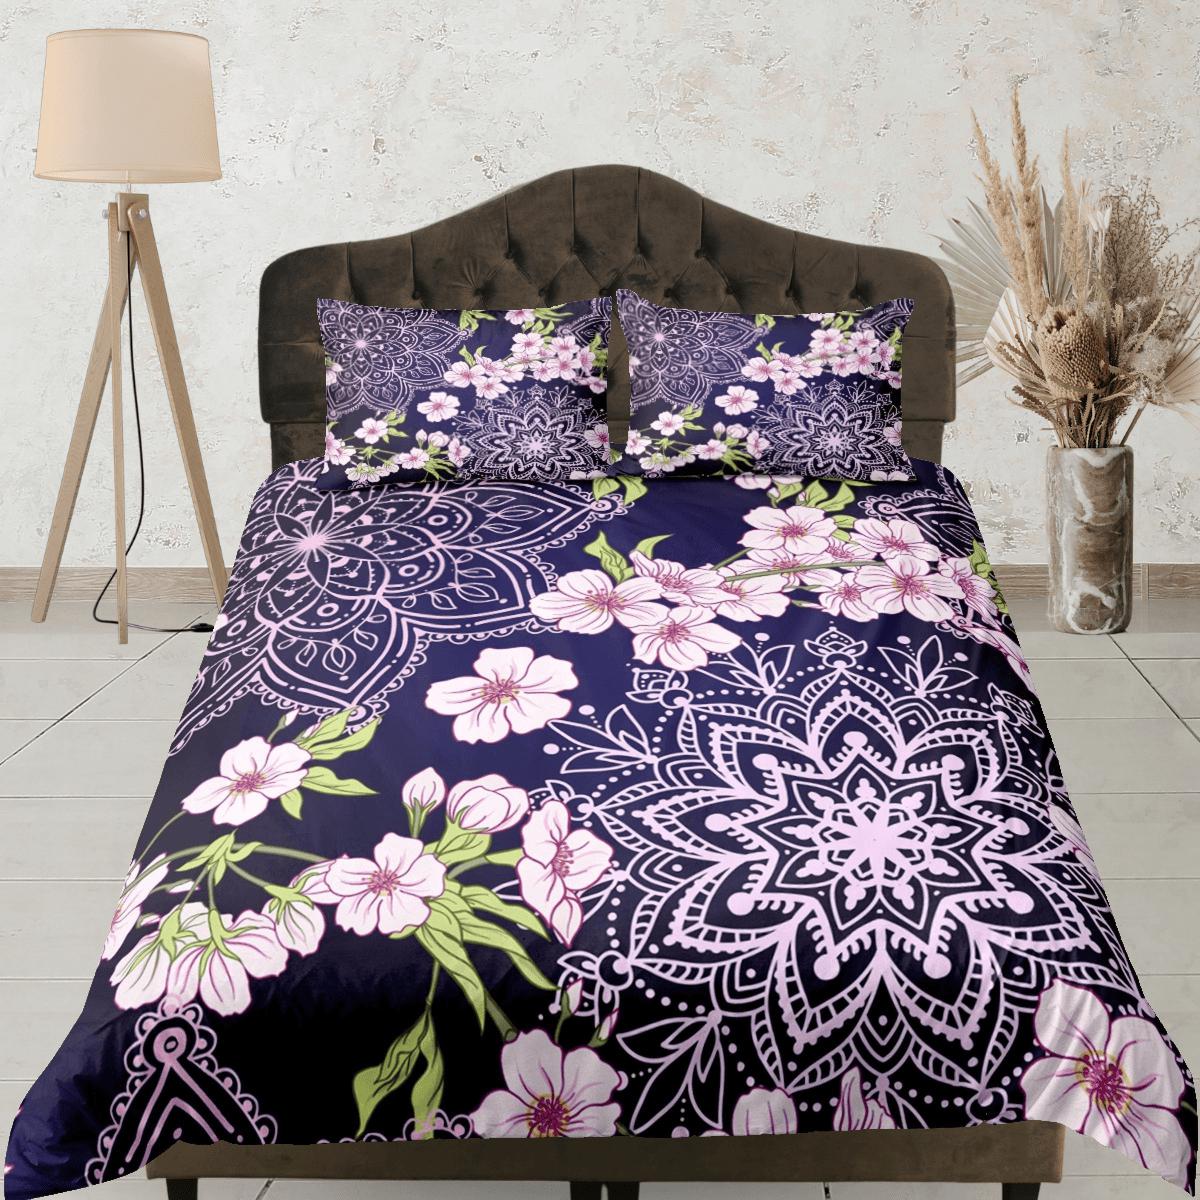 black and purple bed sheets